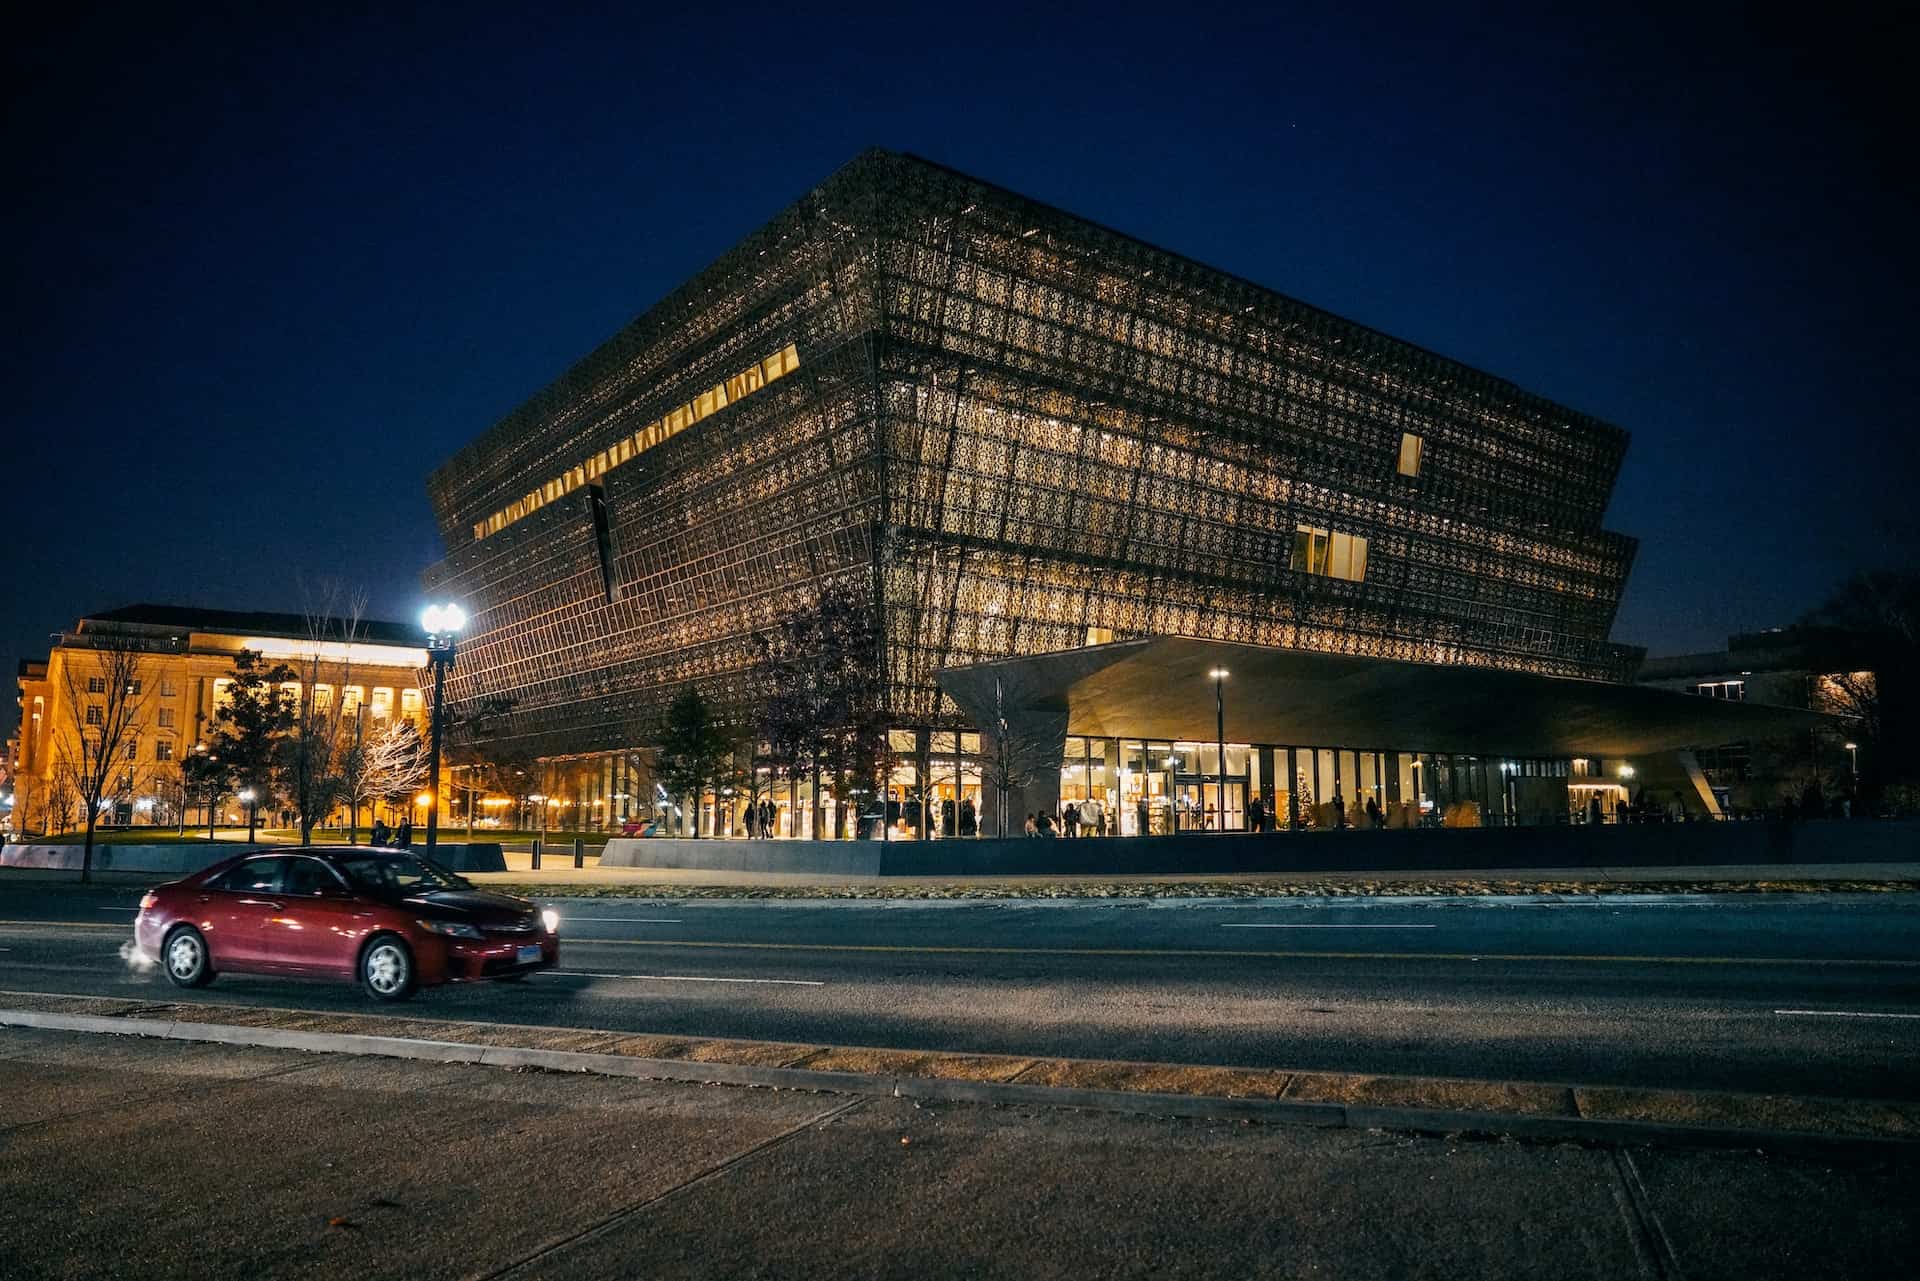 DC Travel Guide: Best DC Museums to Visit